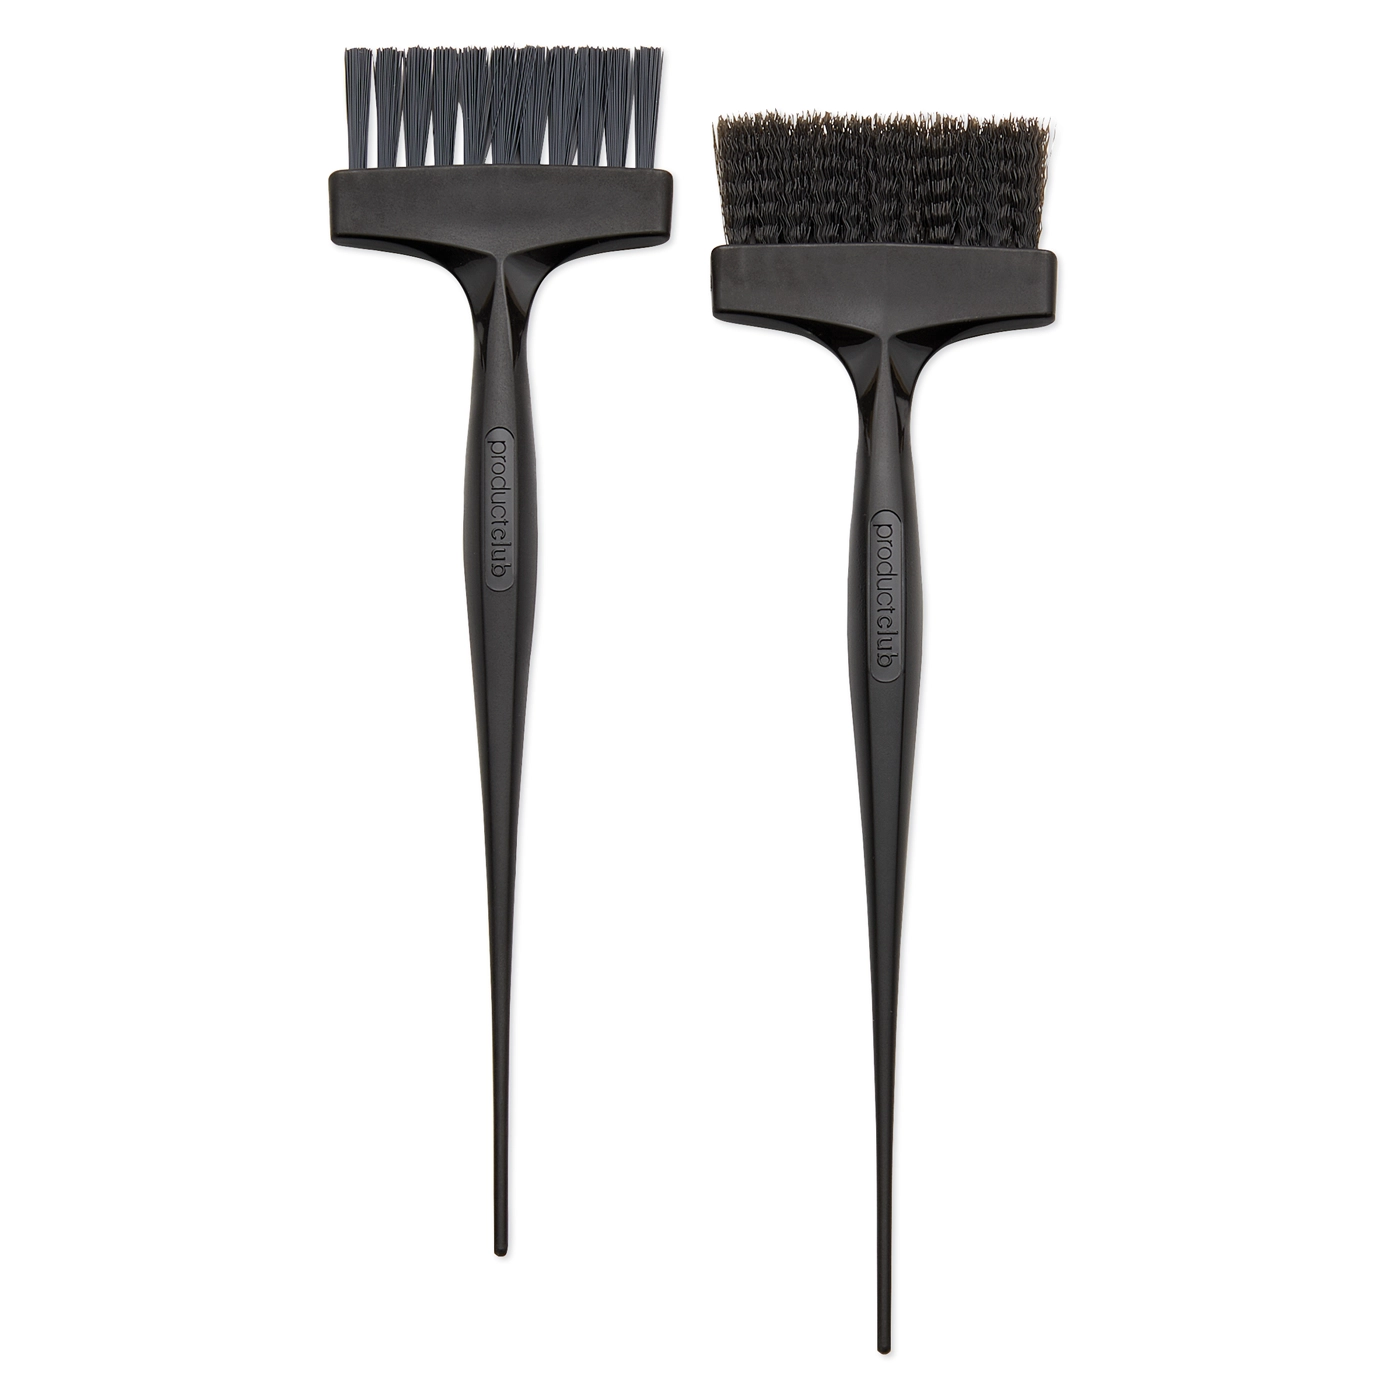 Universal Brush Duo with two different bristle textures, ideal for all hair types.